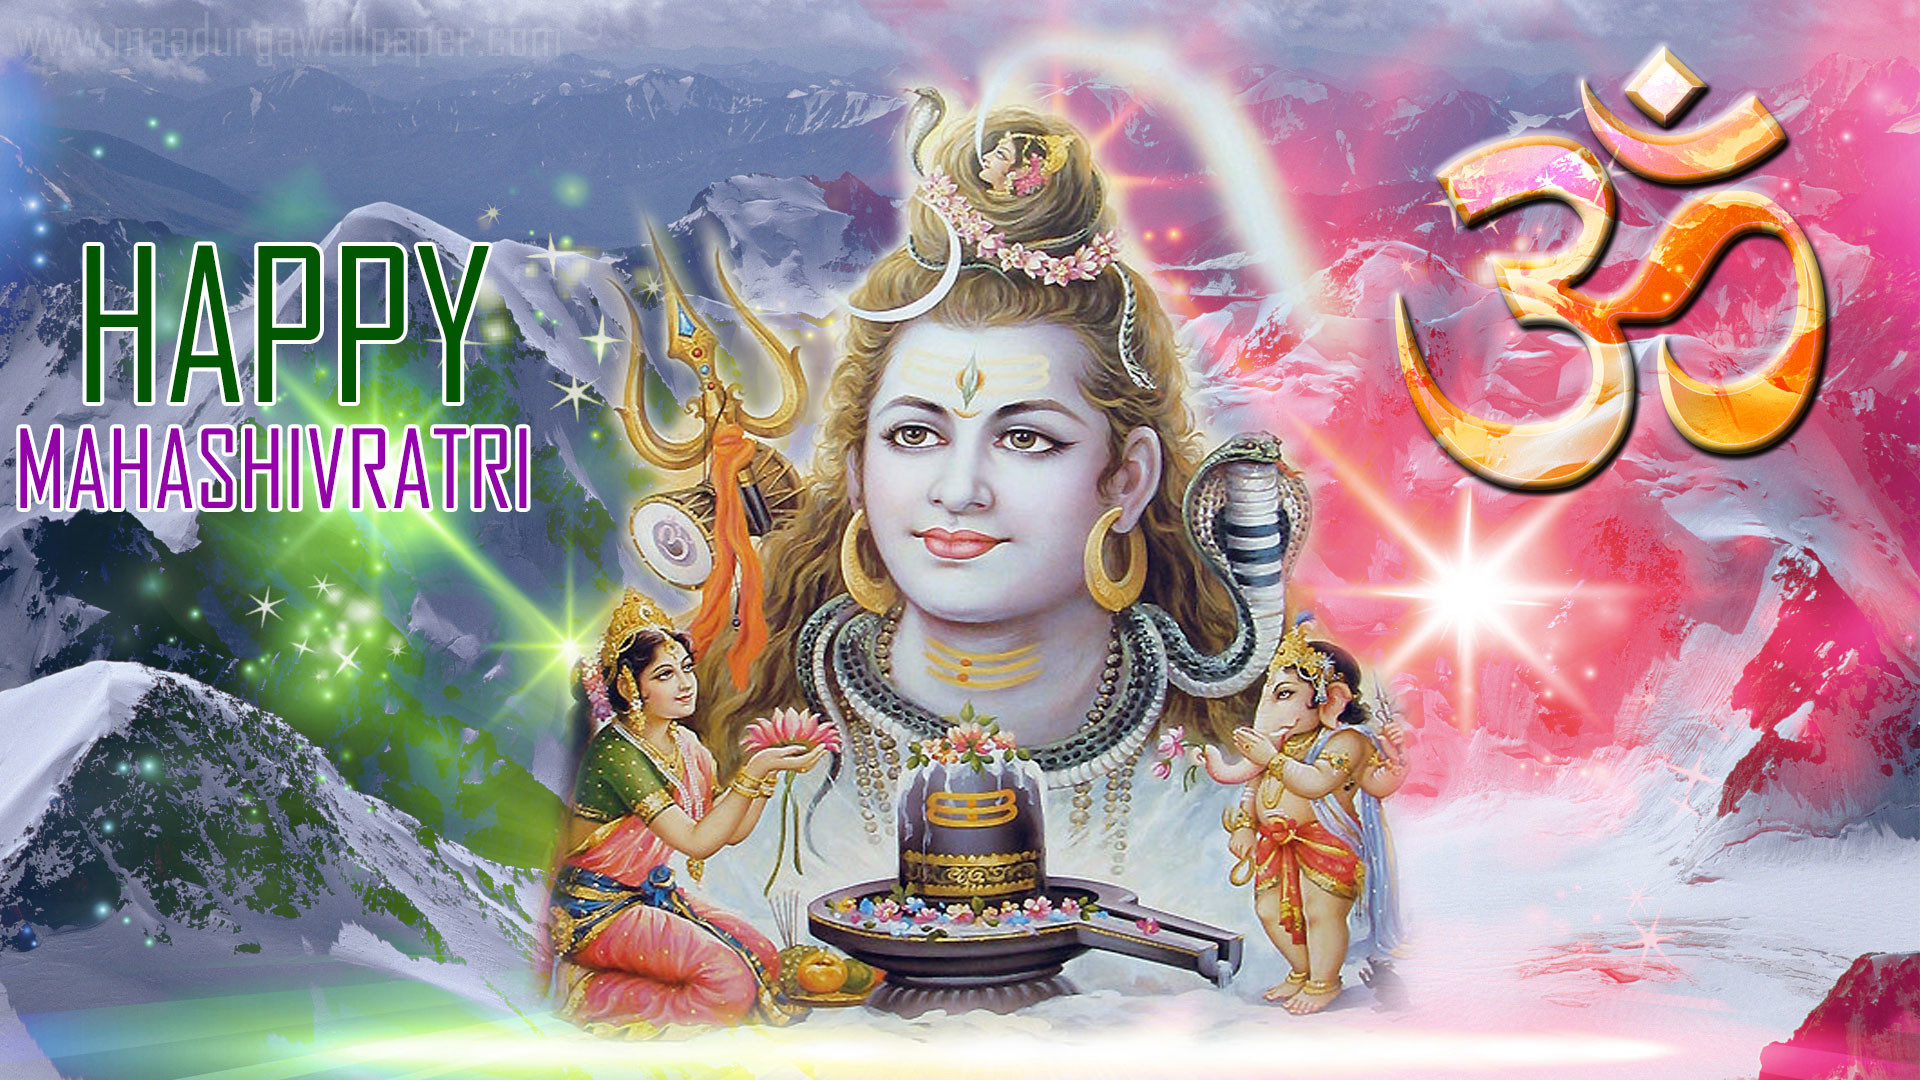 Shiv Bhole Nath Wallpapers Free Download